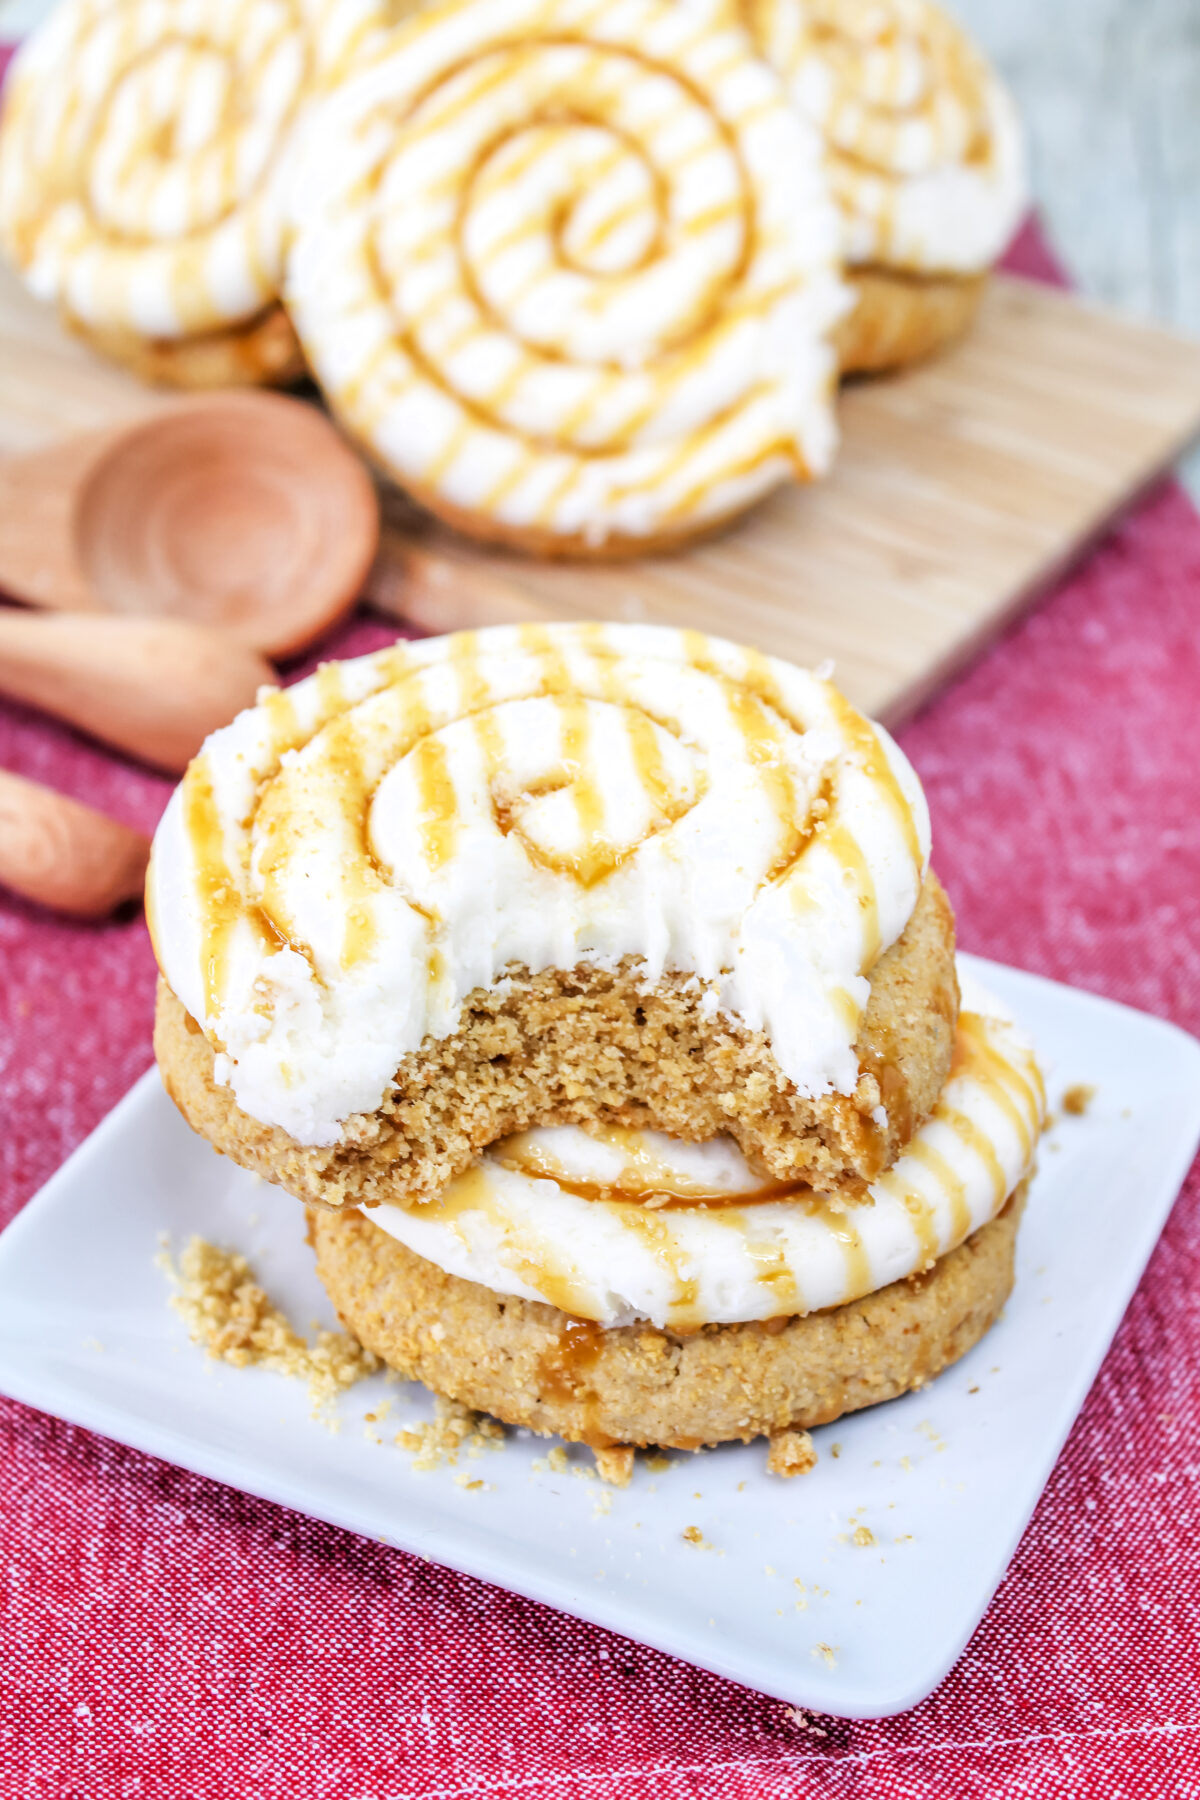 These Crumbl Salted Caramel Cheesecake Cookies feature a buttery cookie frosted with creamy cheesecake frosting drizzled with salted caramel.